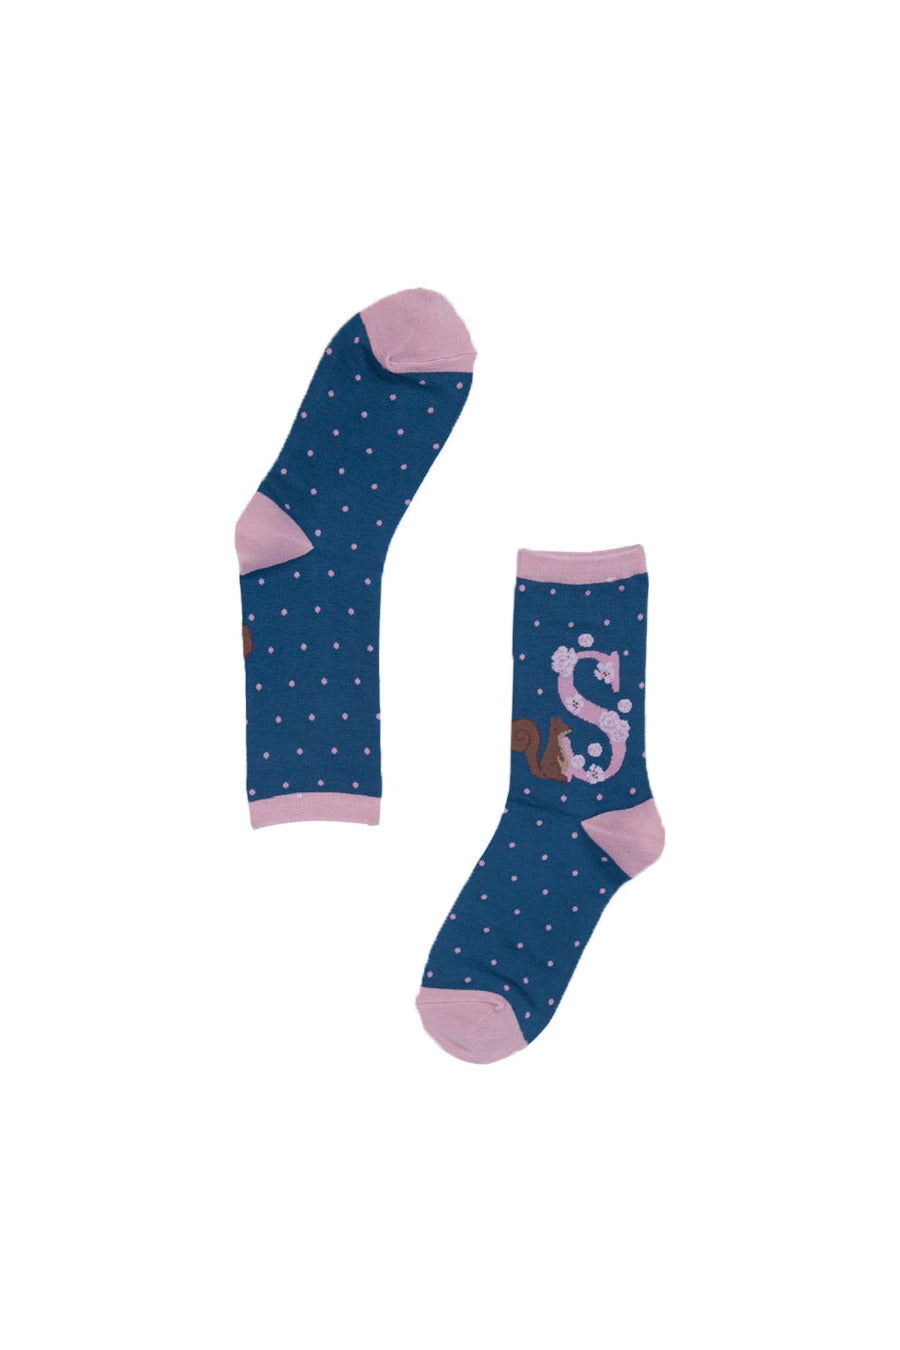 blue, pink bamboo socks with the initial S